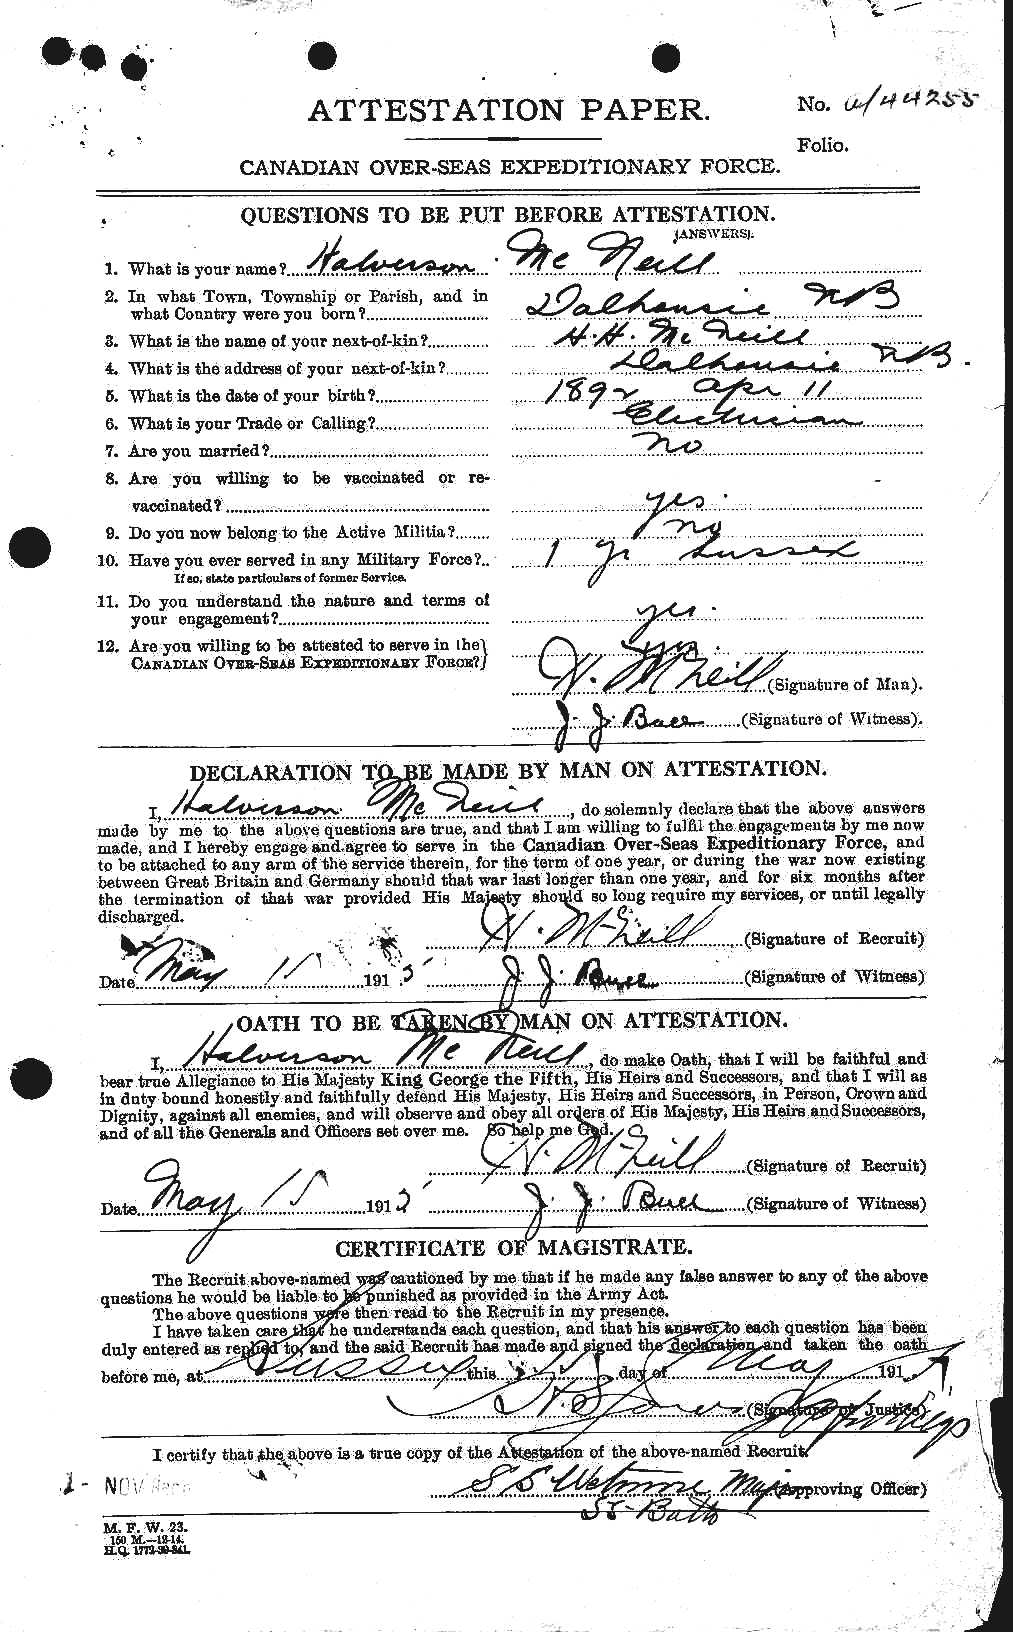 Personnel Records of the First World War - CEF 538929a